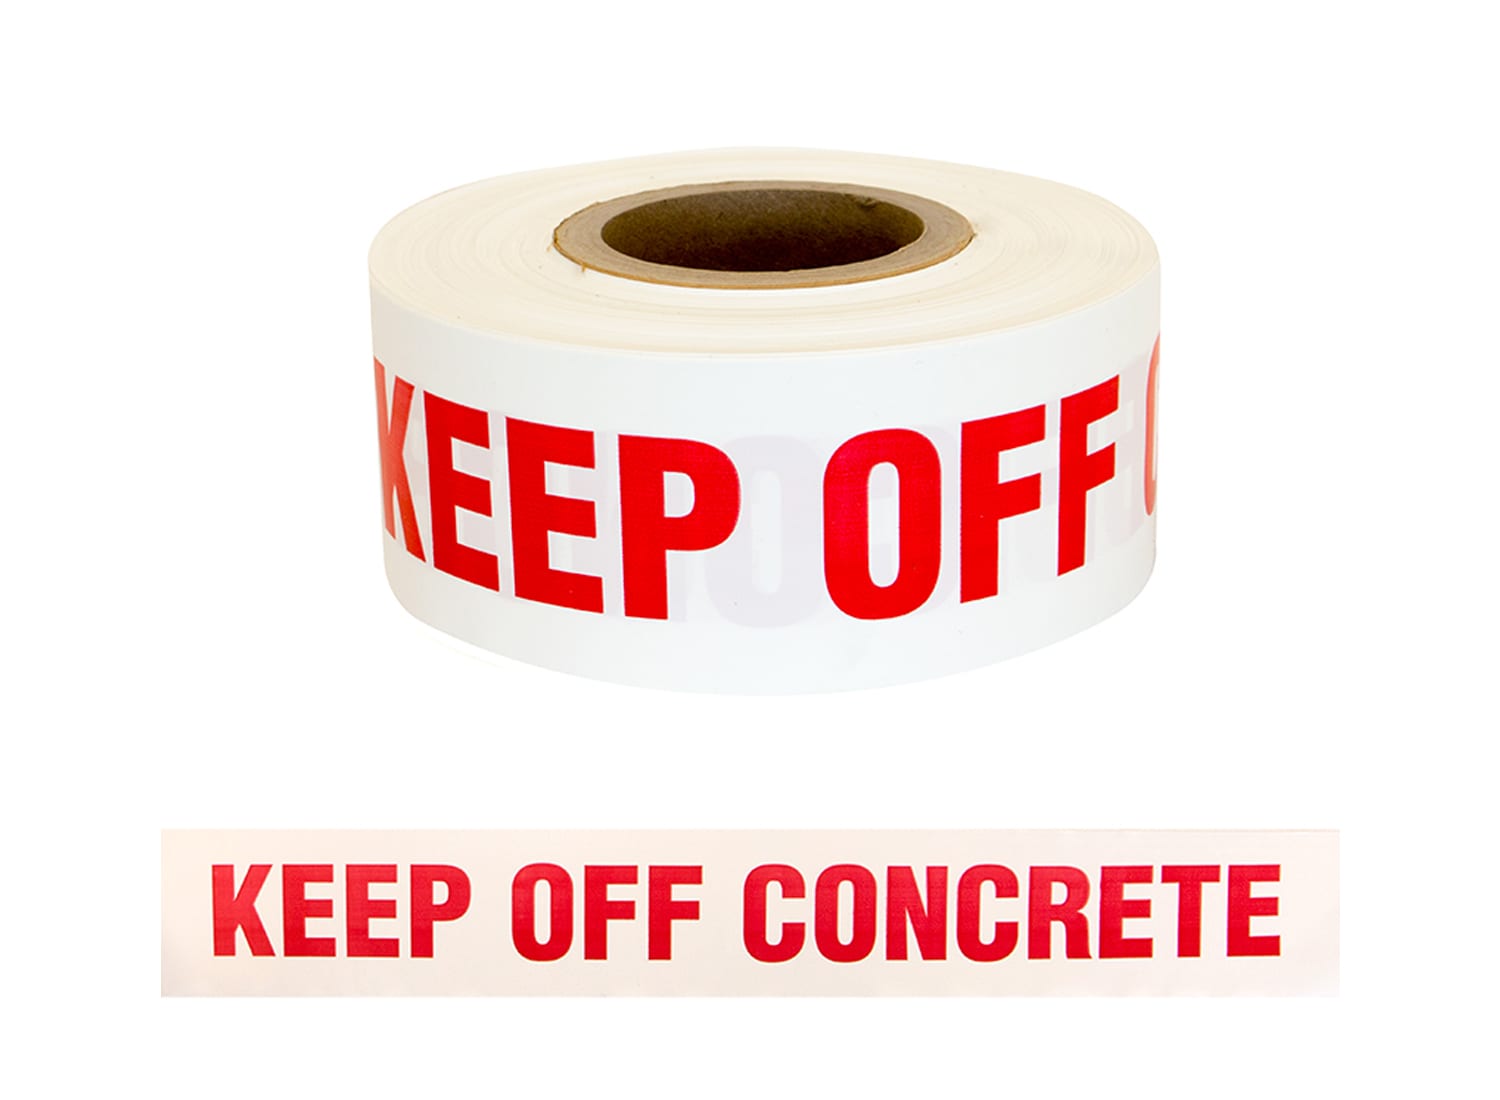 Safety Warning Tape - "Keep Off Concrete"